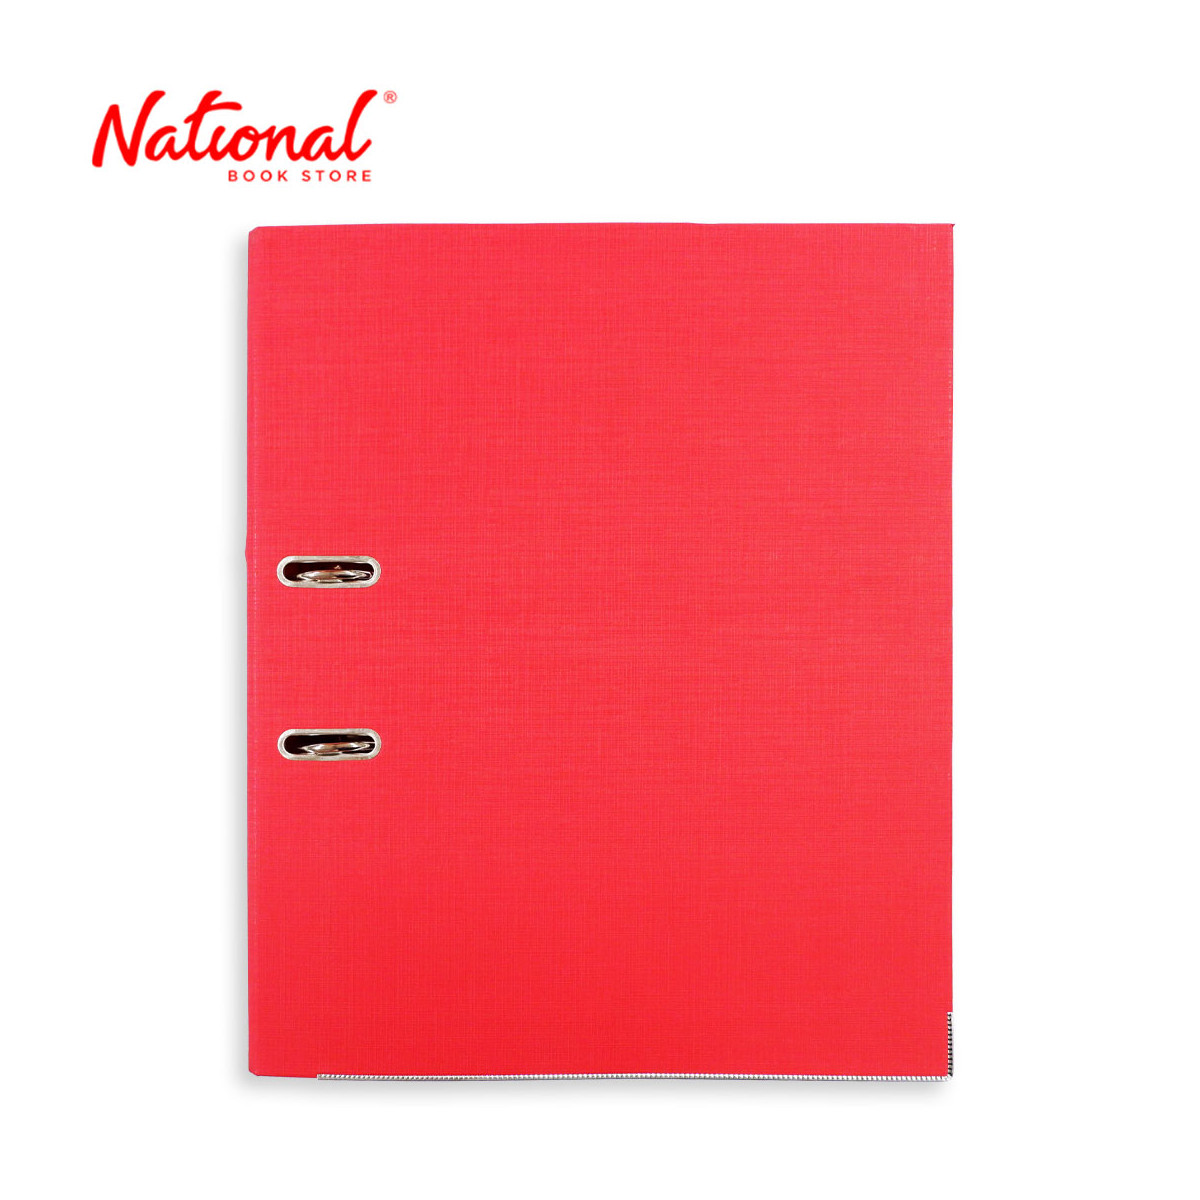 Seagull Lever Arch File Long 7cm VR350 2.5in, Red - Office Supplies - Filing Supplies